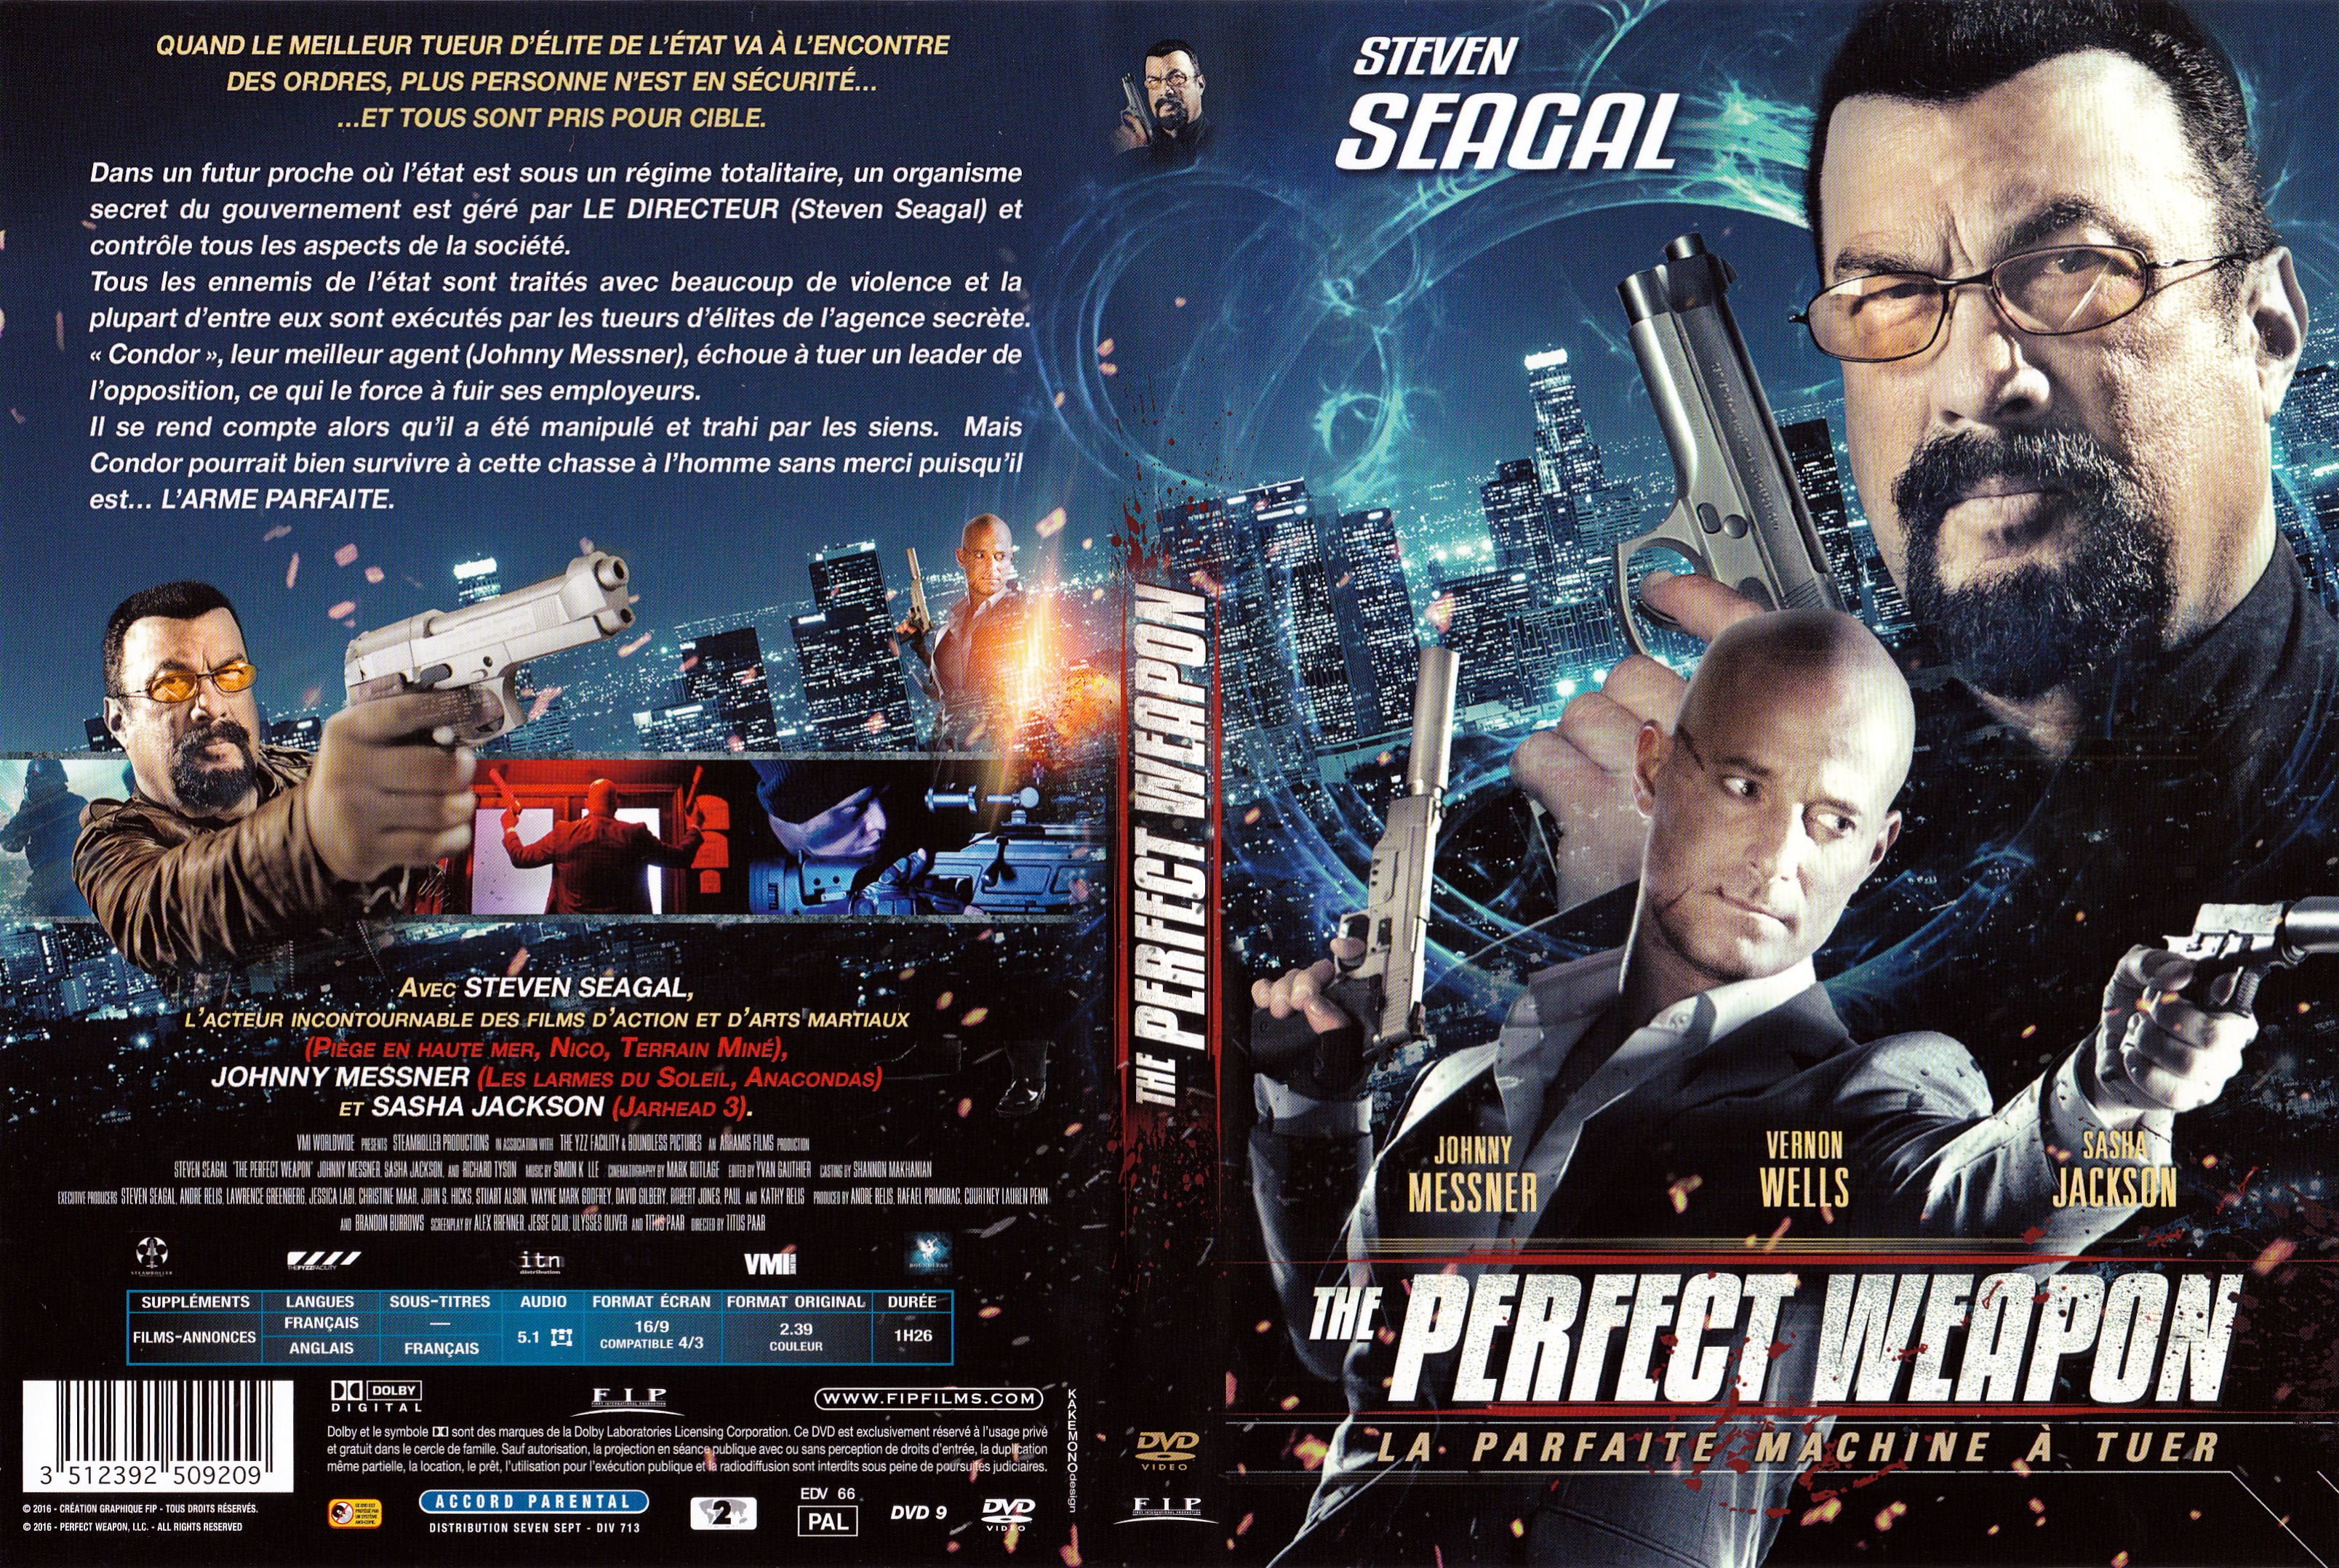 Jaquette DVD The perfect weapon